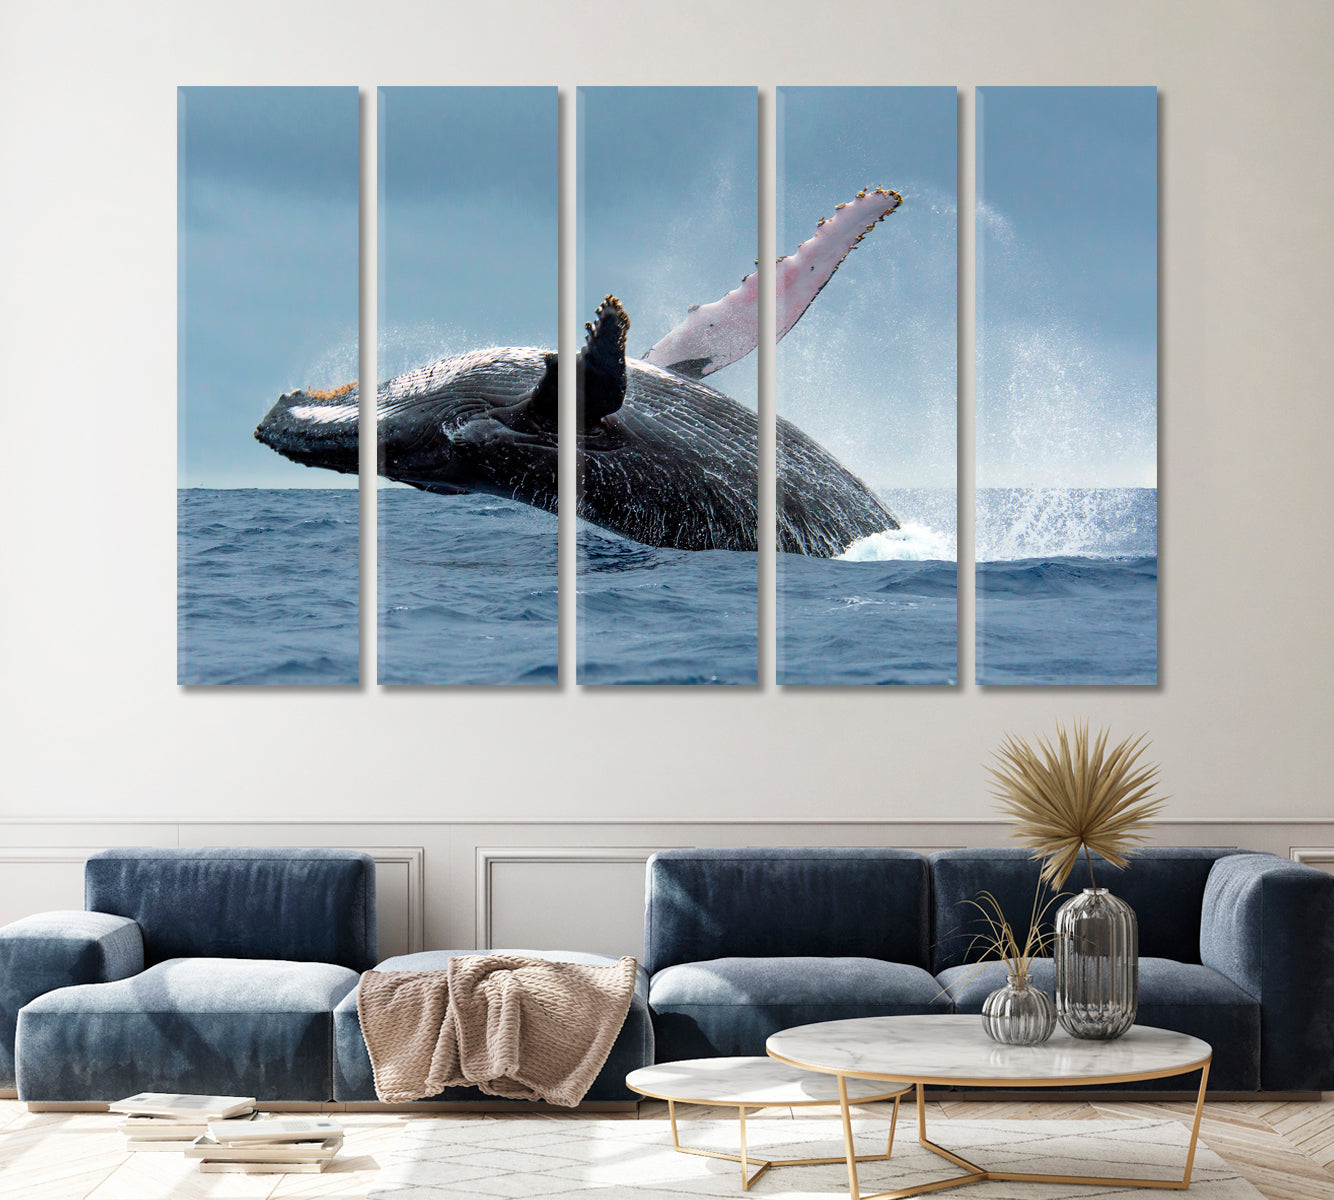 Humpback Whale in Tonga Waters Canvas Print ArtLexy 5 Panels 36"x24" inches 